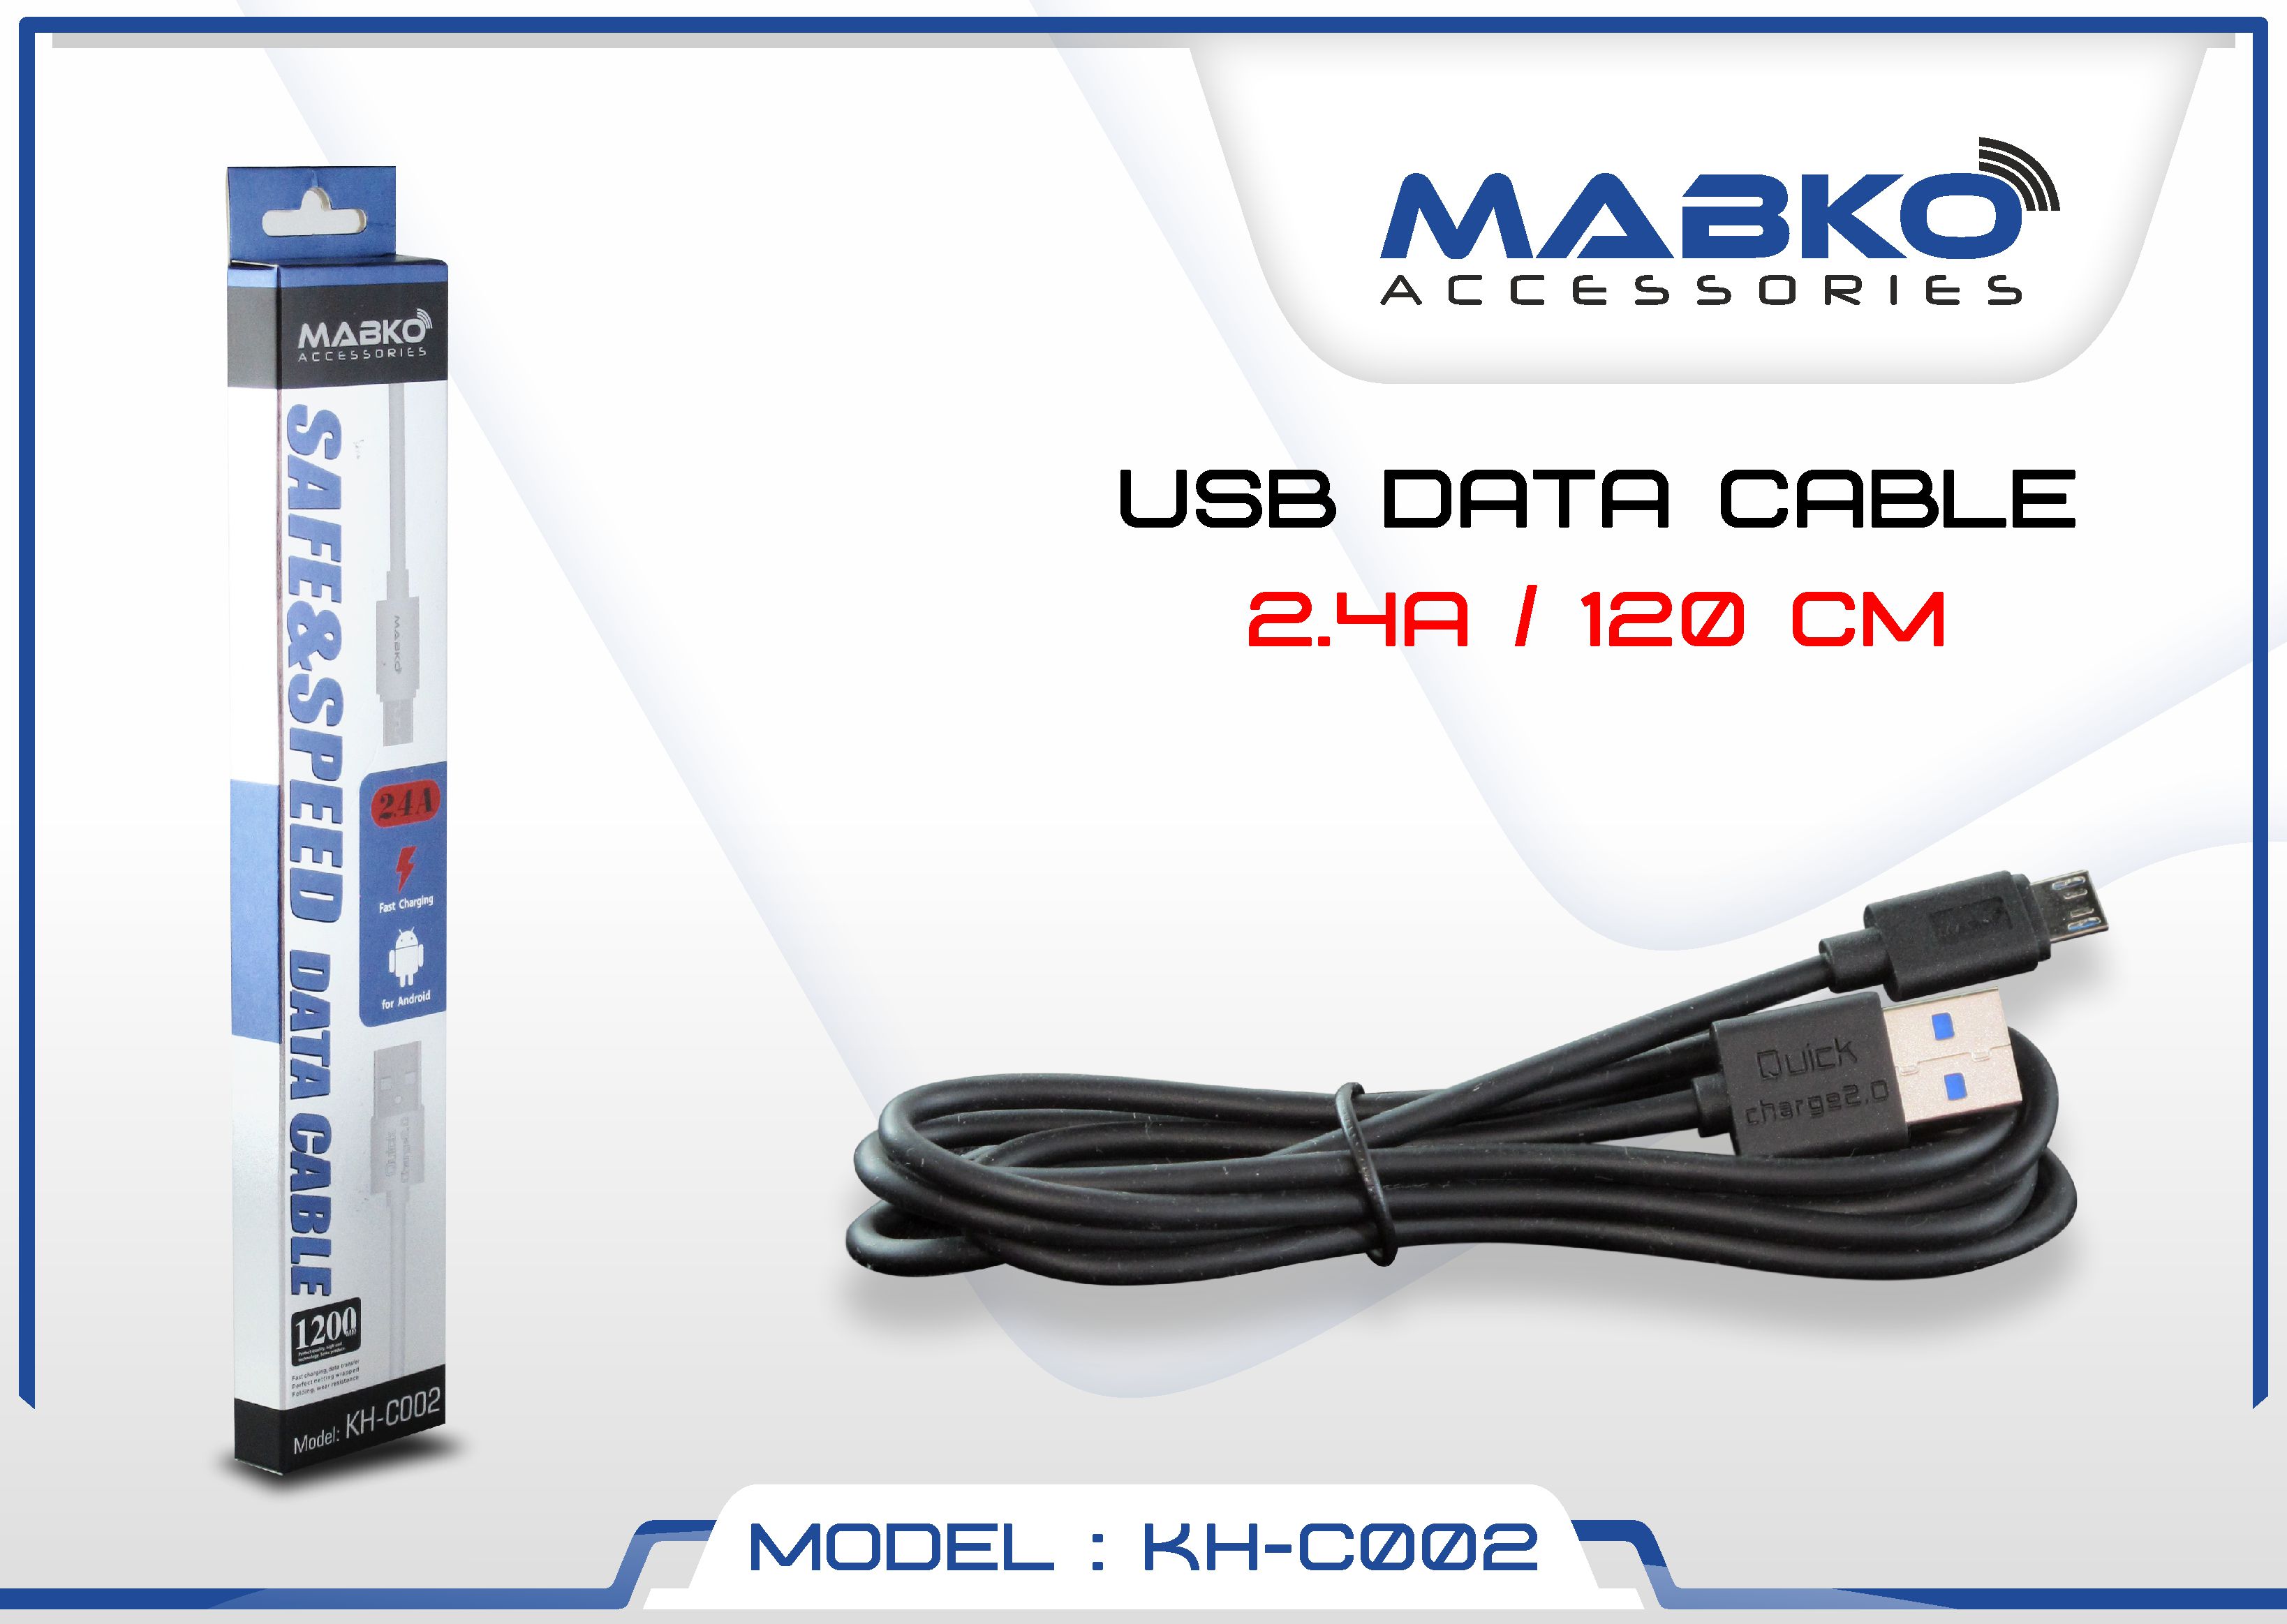 MABKO MAGNATIC CABLE KH-13